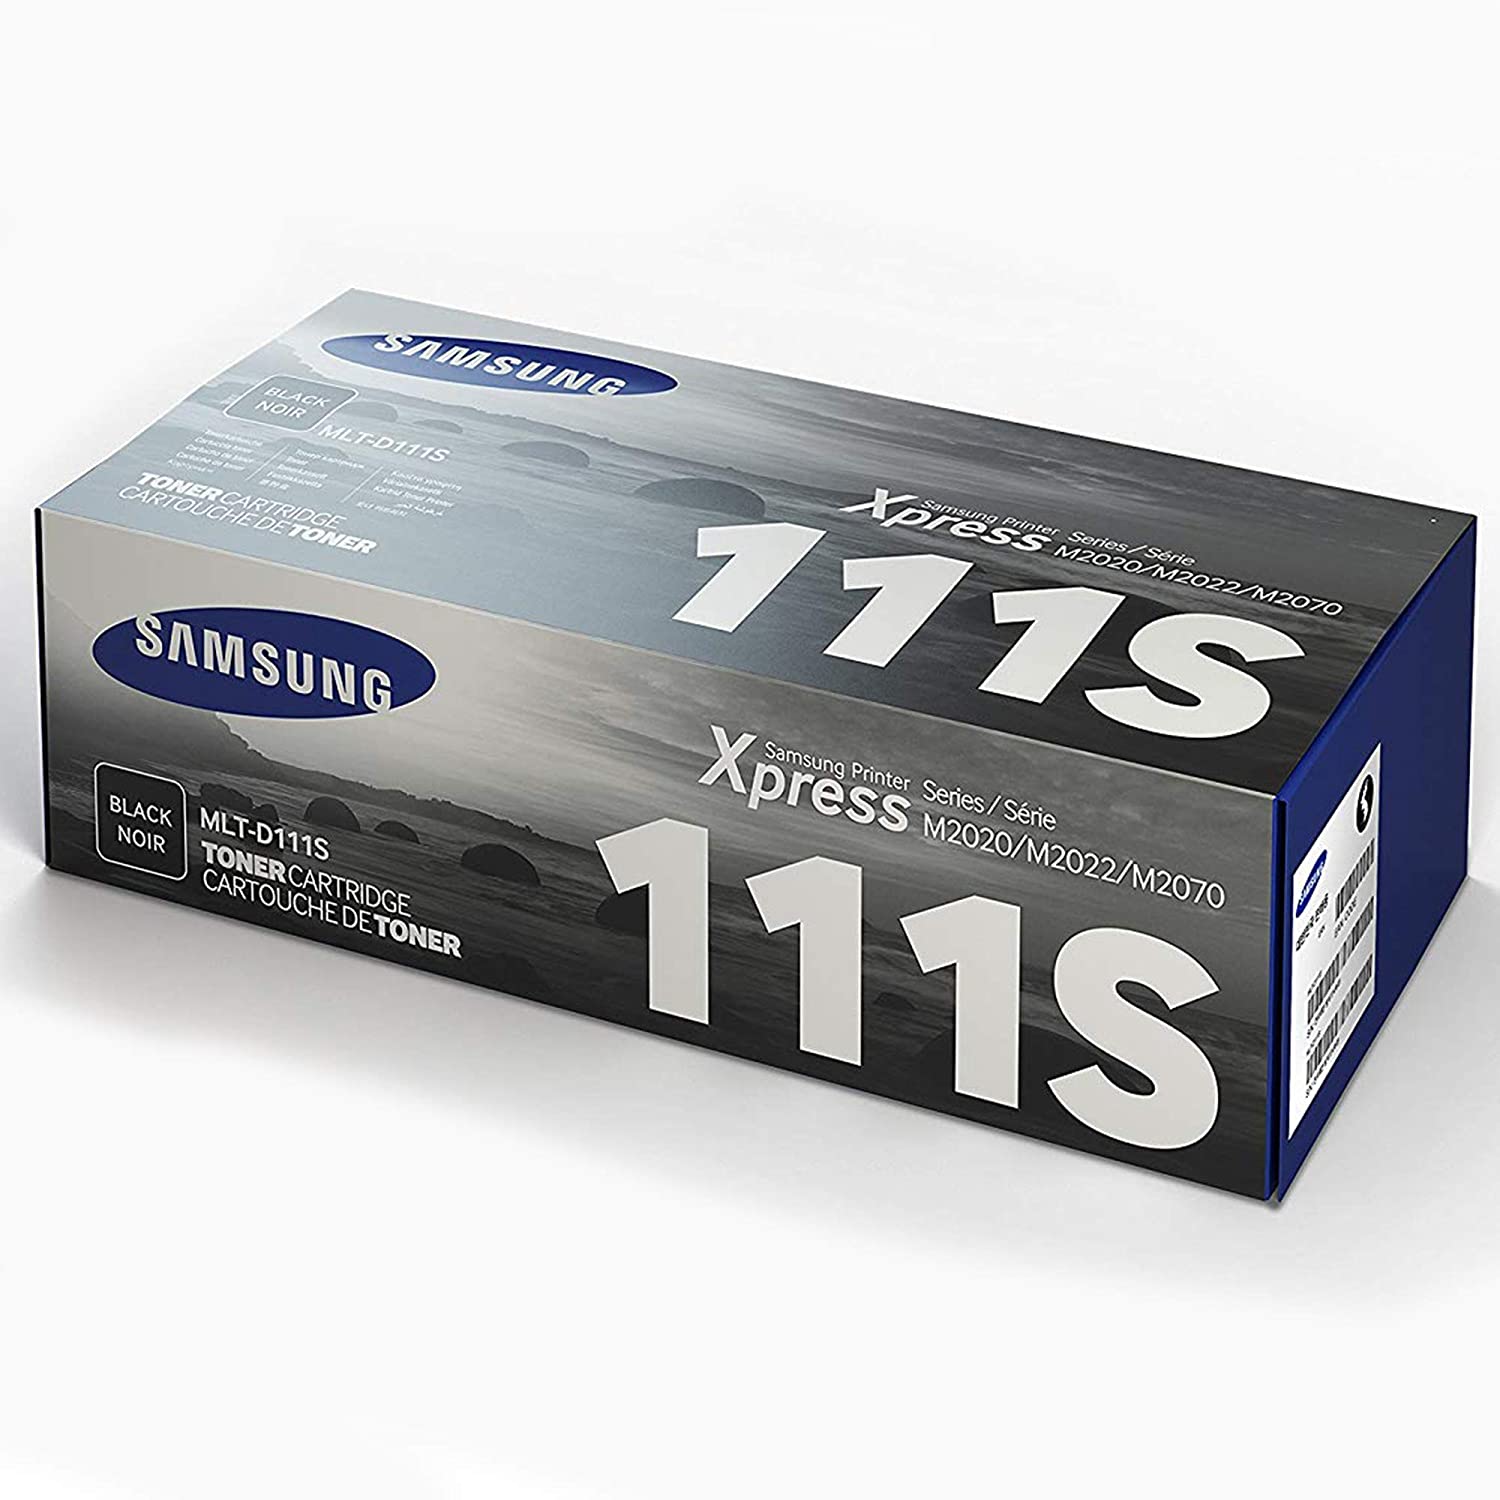 Absolute Toner Samsung Genuine MLT-D111S (SU814A) Black Toner Cartridge, Yield up to 1000 pages Originial Samsung Cartridges